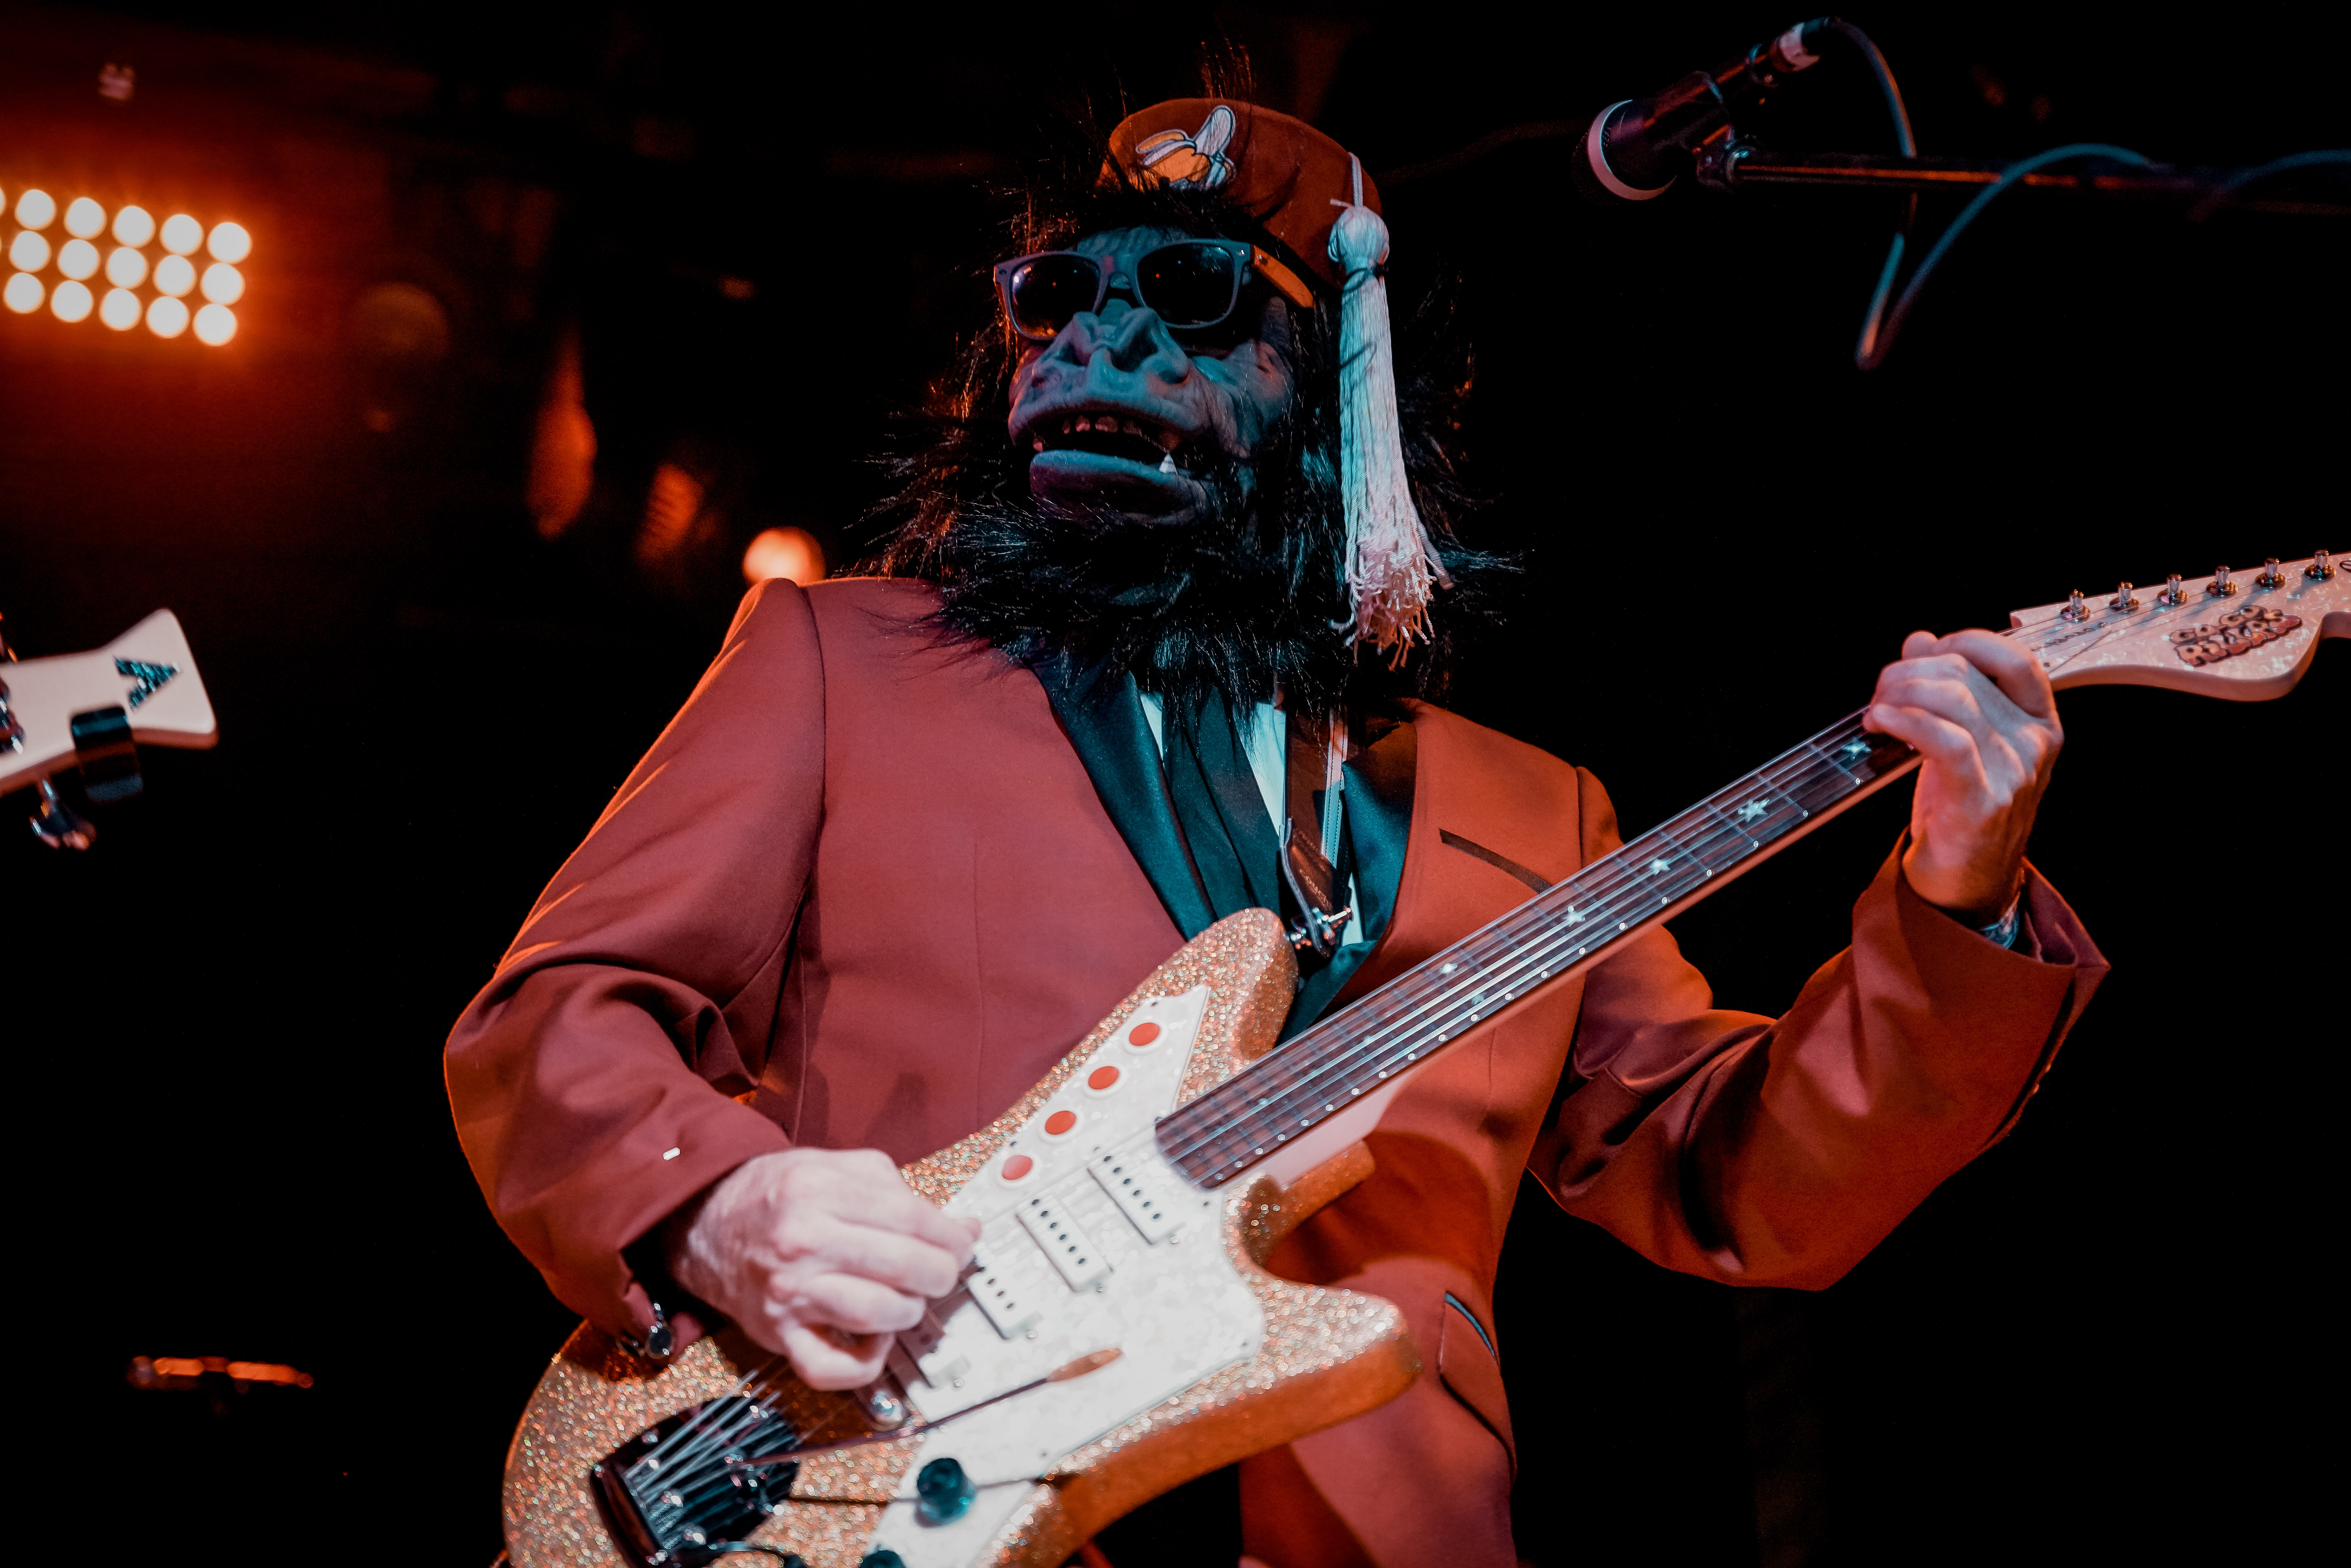 A musician in a gorillas costume playing guitar